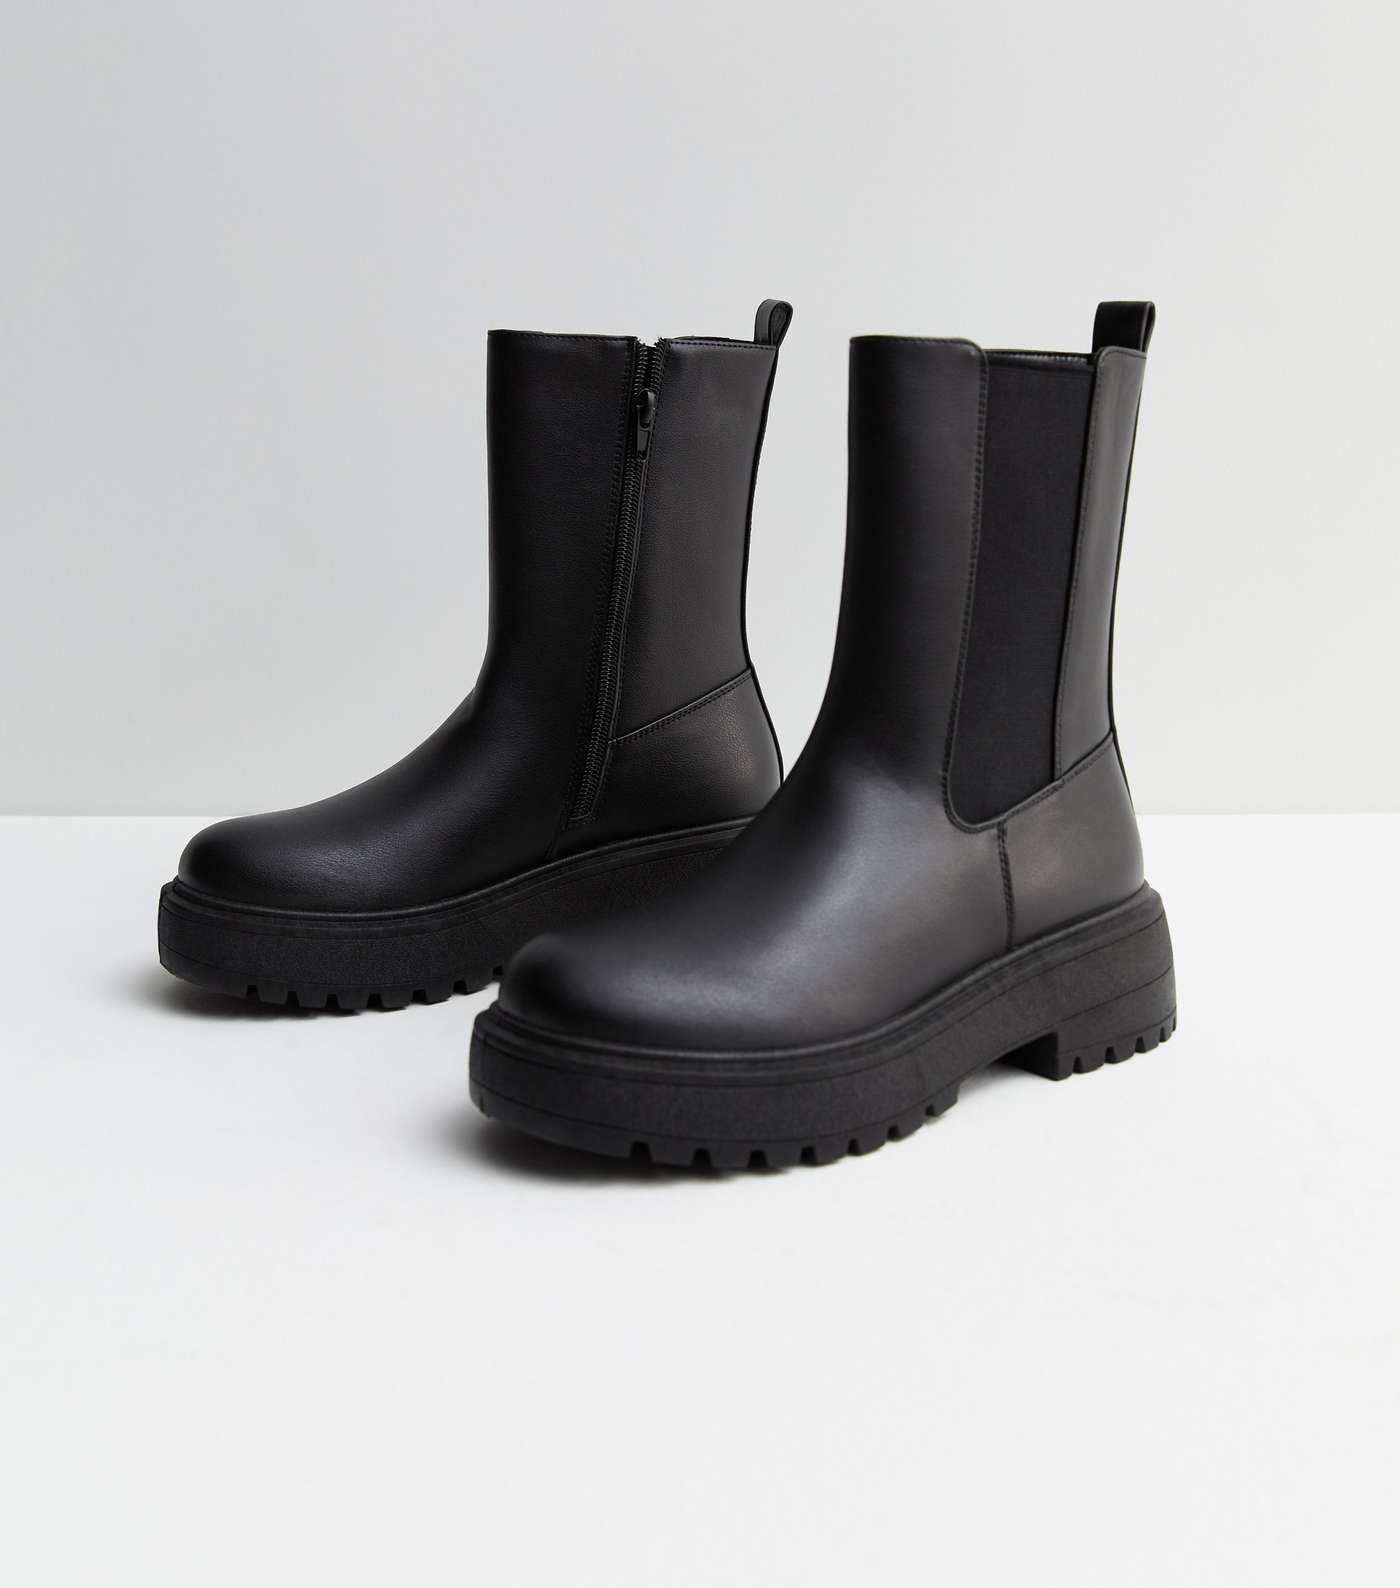 Black Leather-Look High Ankle Chelsea Boots Image 3